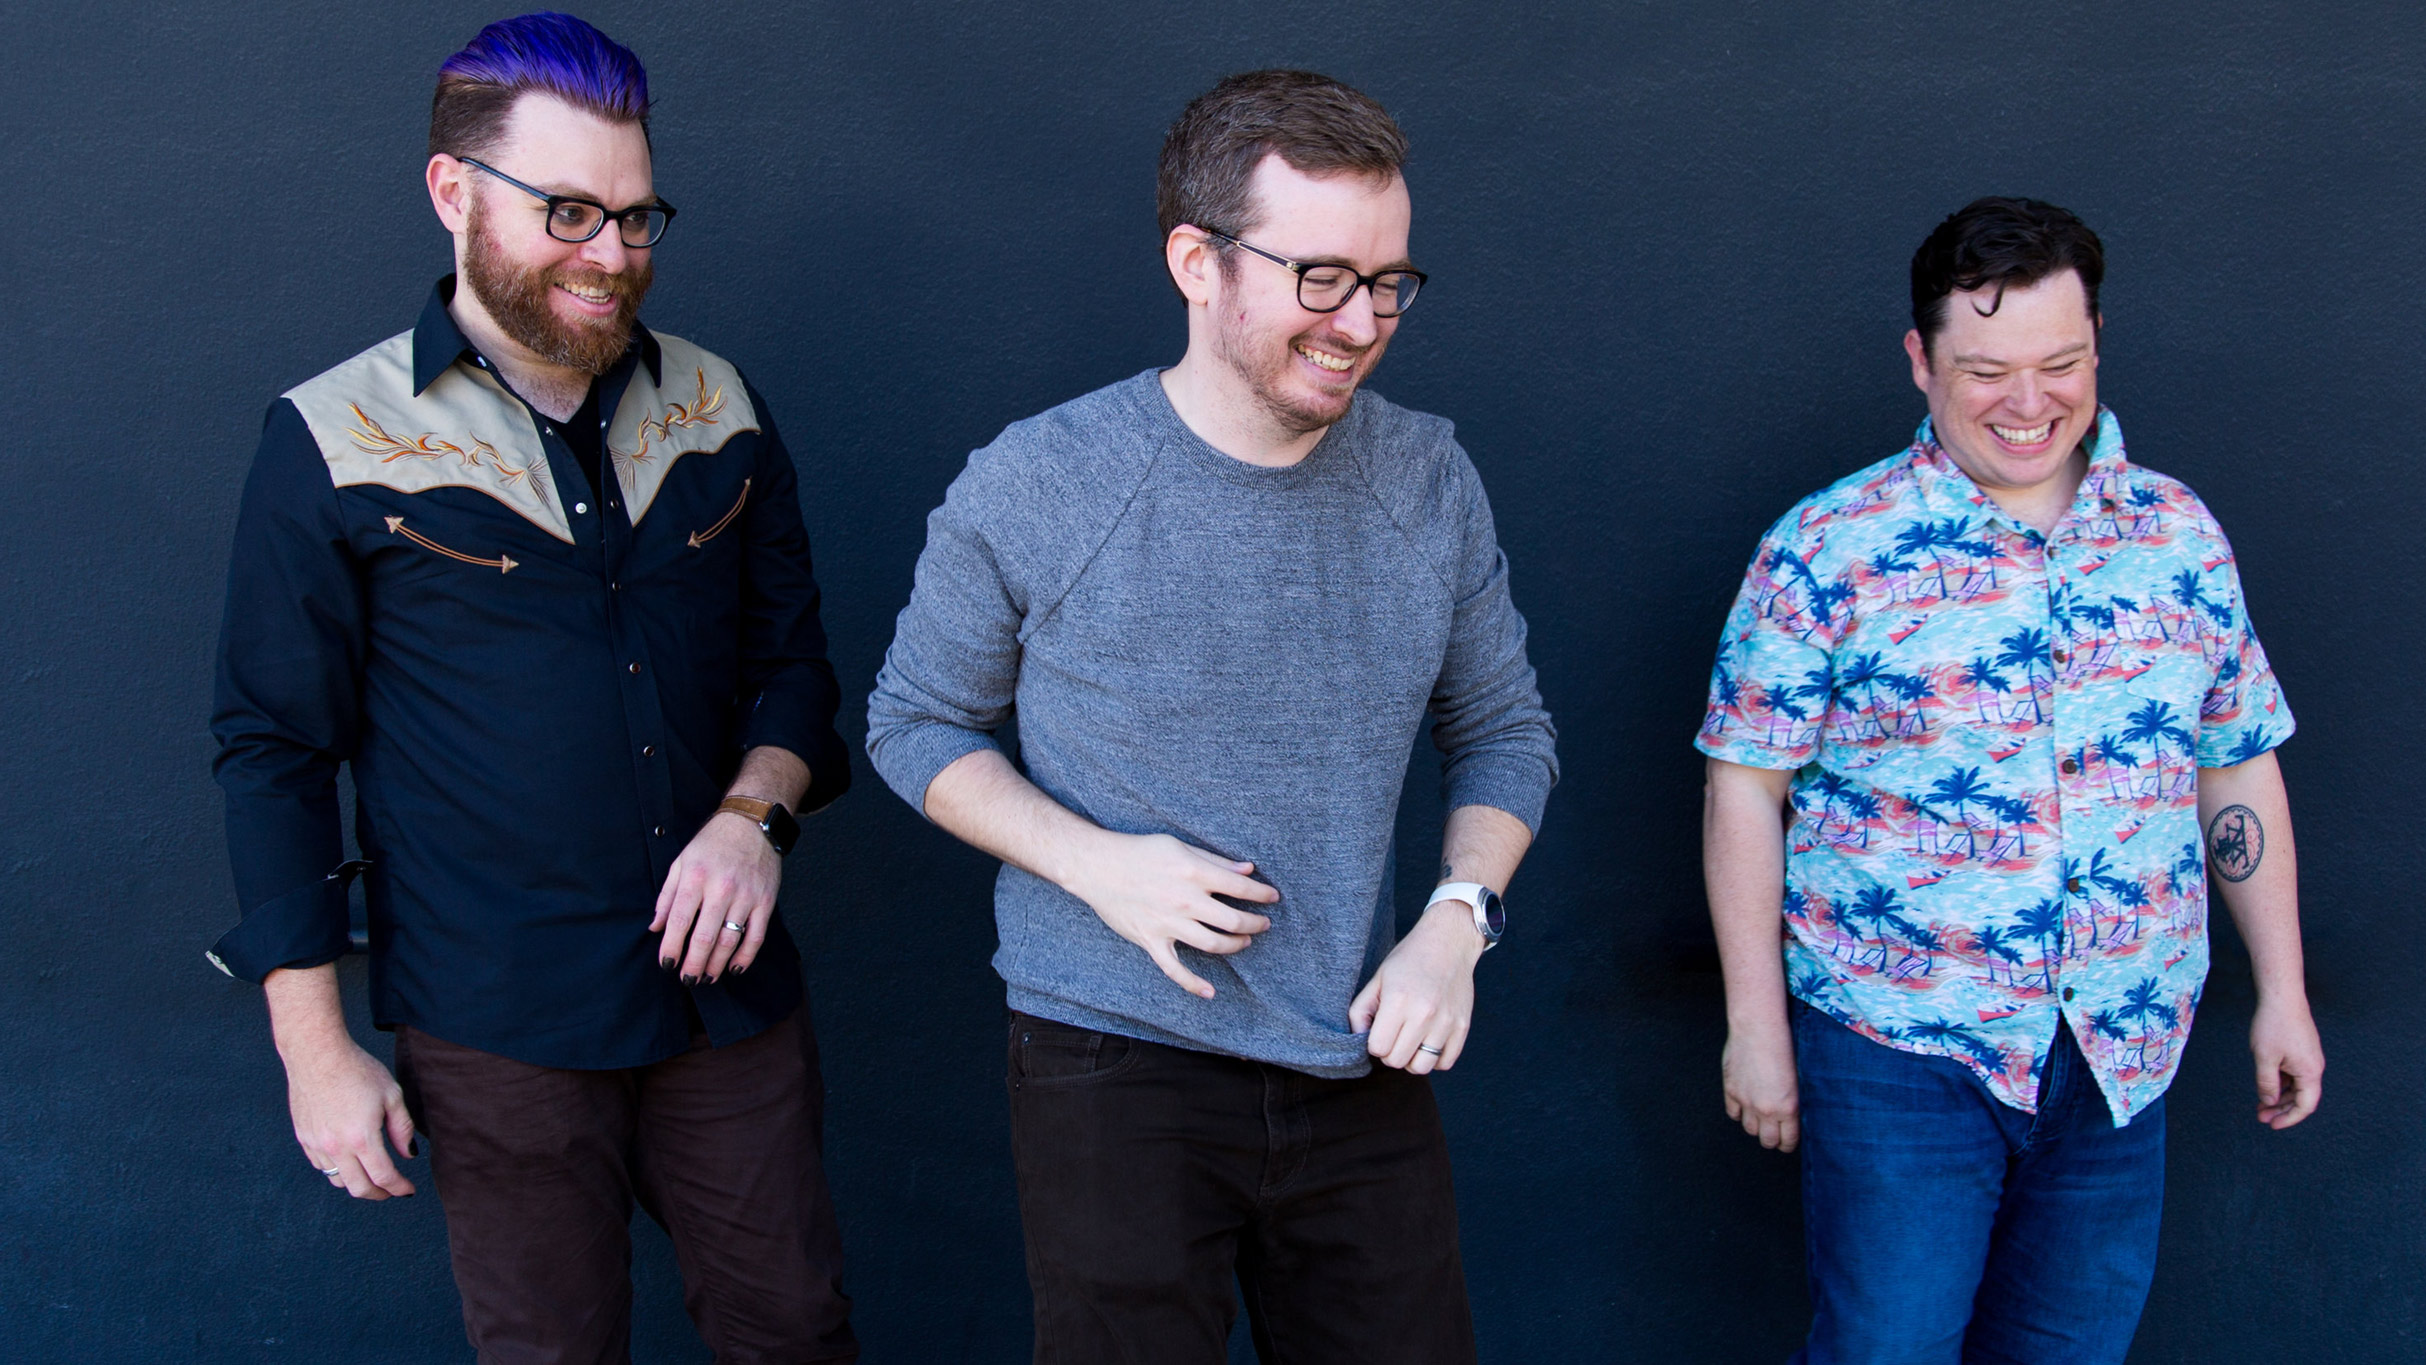 McElroys - My Brother, My Brother and Me